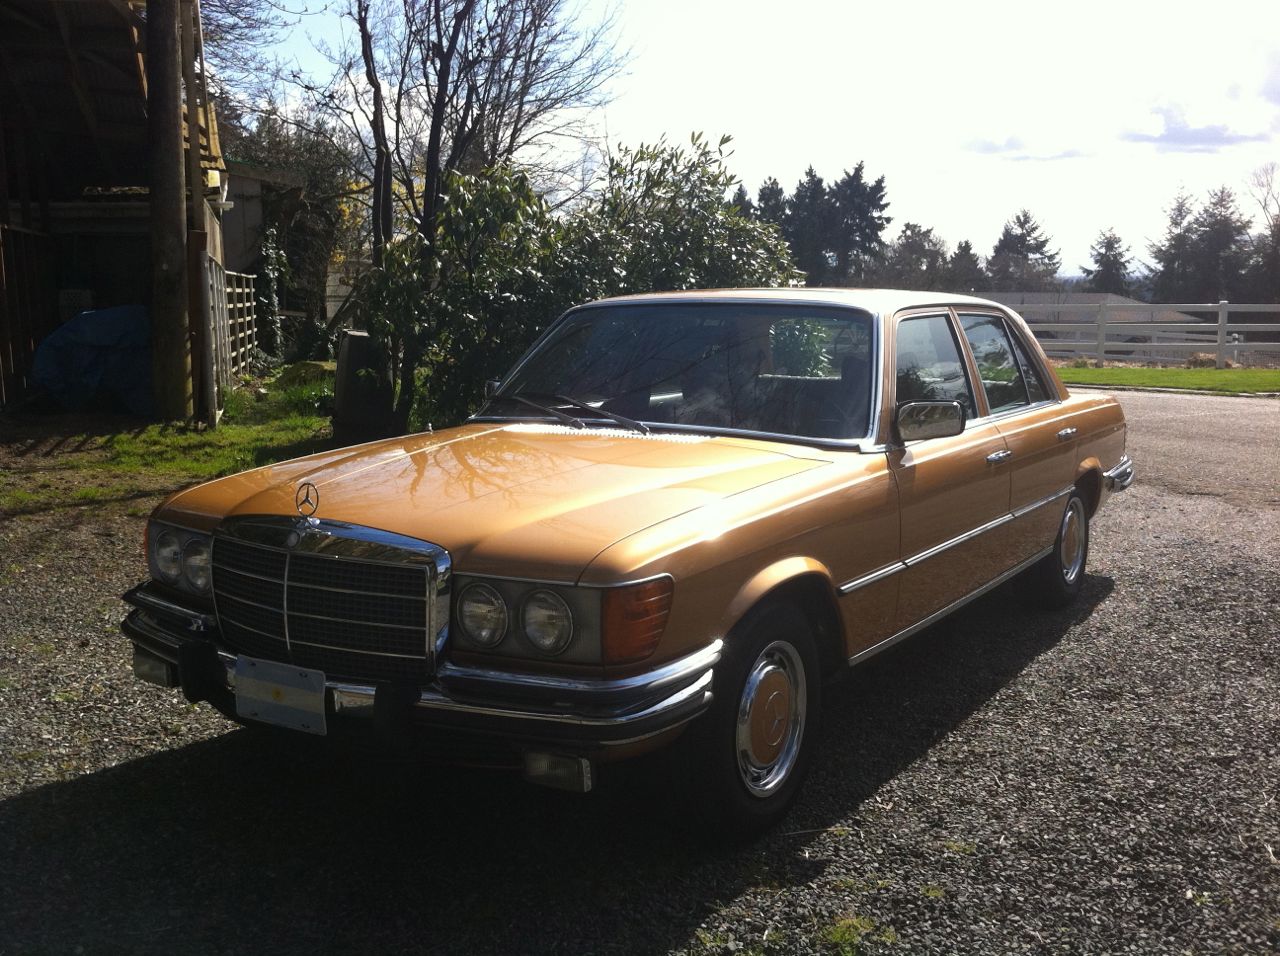 "Goldie" 
1973 450SE, first year "S" class.
Euro Bumpers
Fully restored
Wife's old ride.